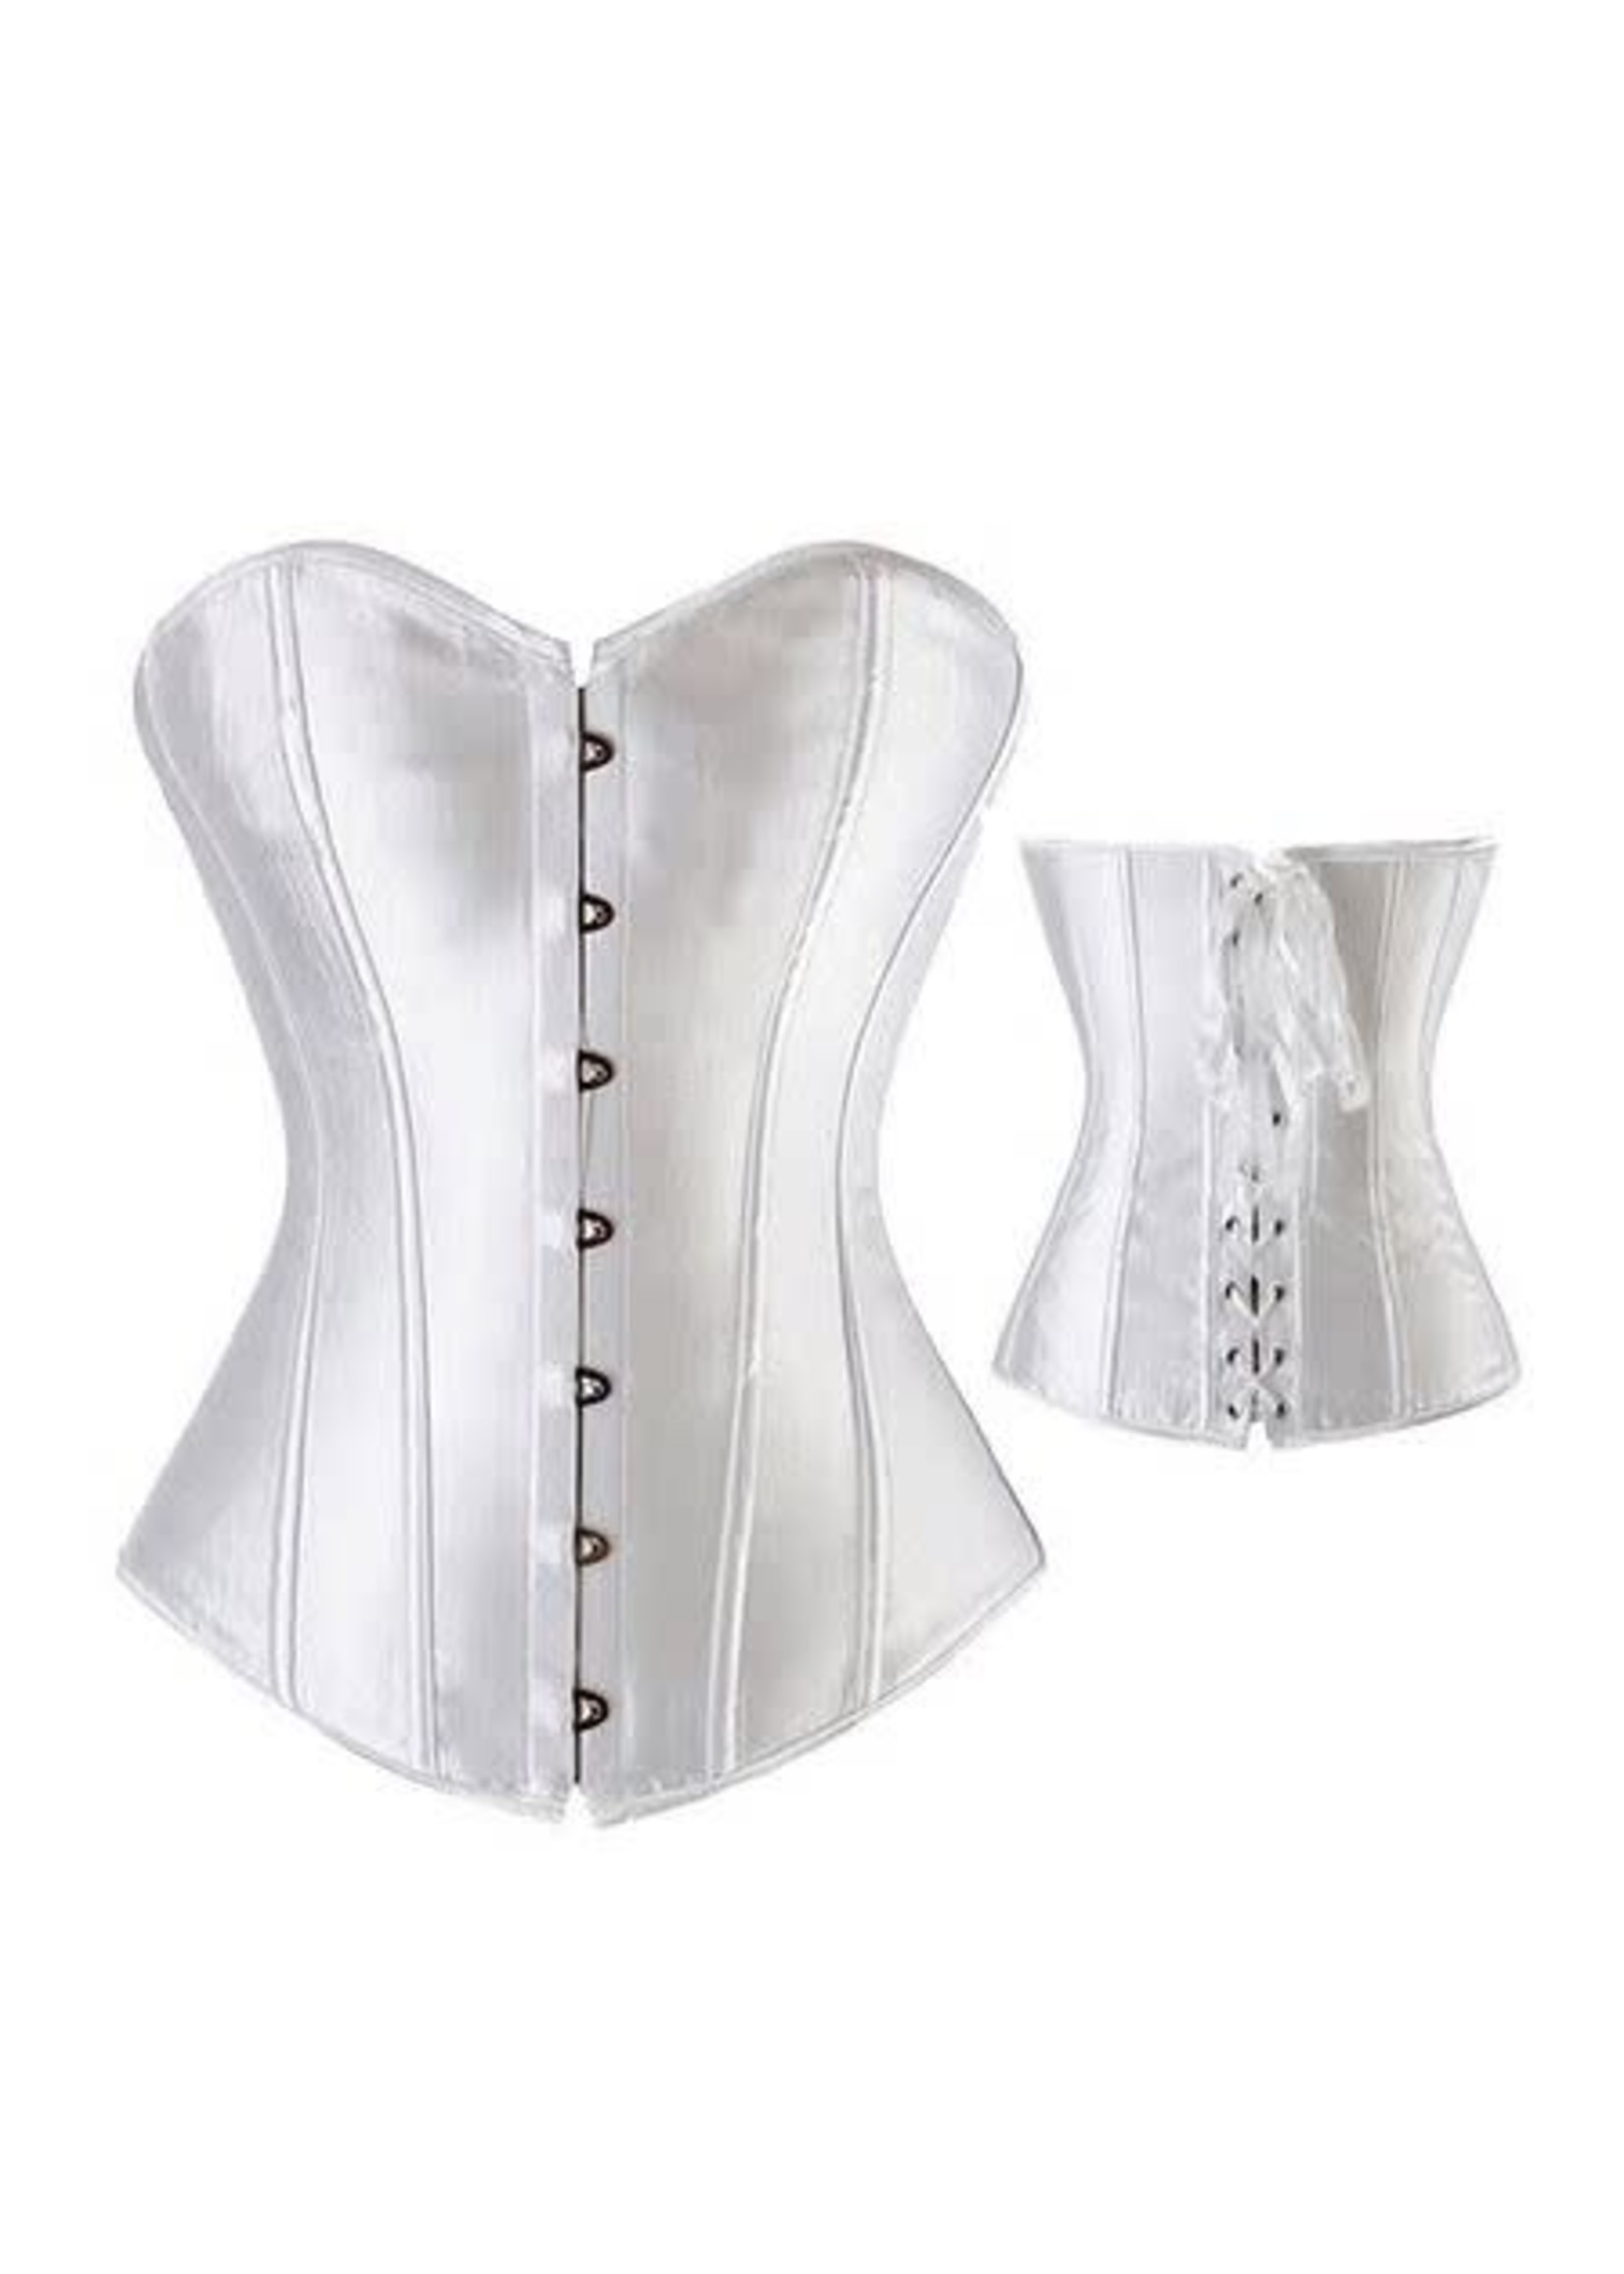 Man in Corsets Trend: Male Corsetry Example with Photos – Miss